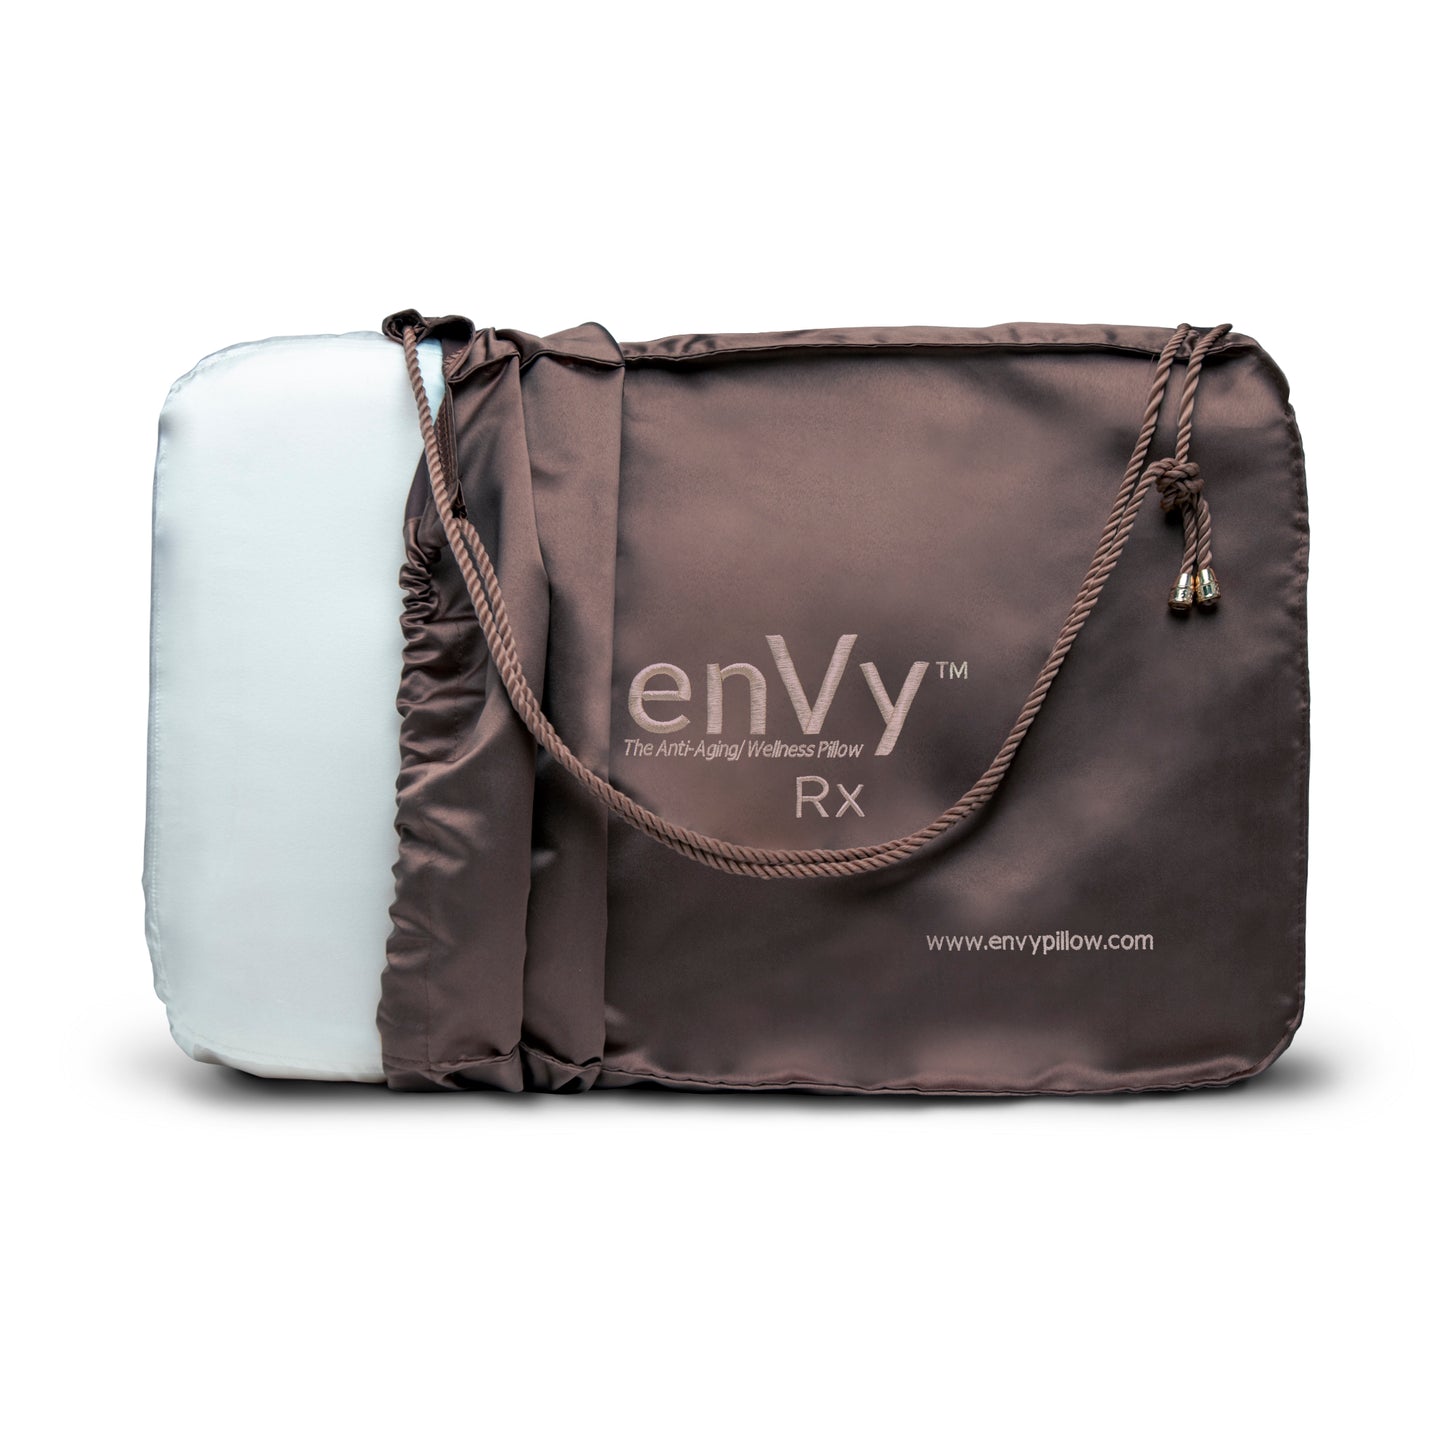 enVy® RX 100% Natural Latex Anti-Aging Pillow with Certified Botanical TENCEL™ Pillowcase